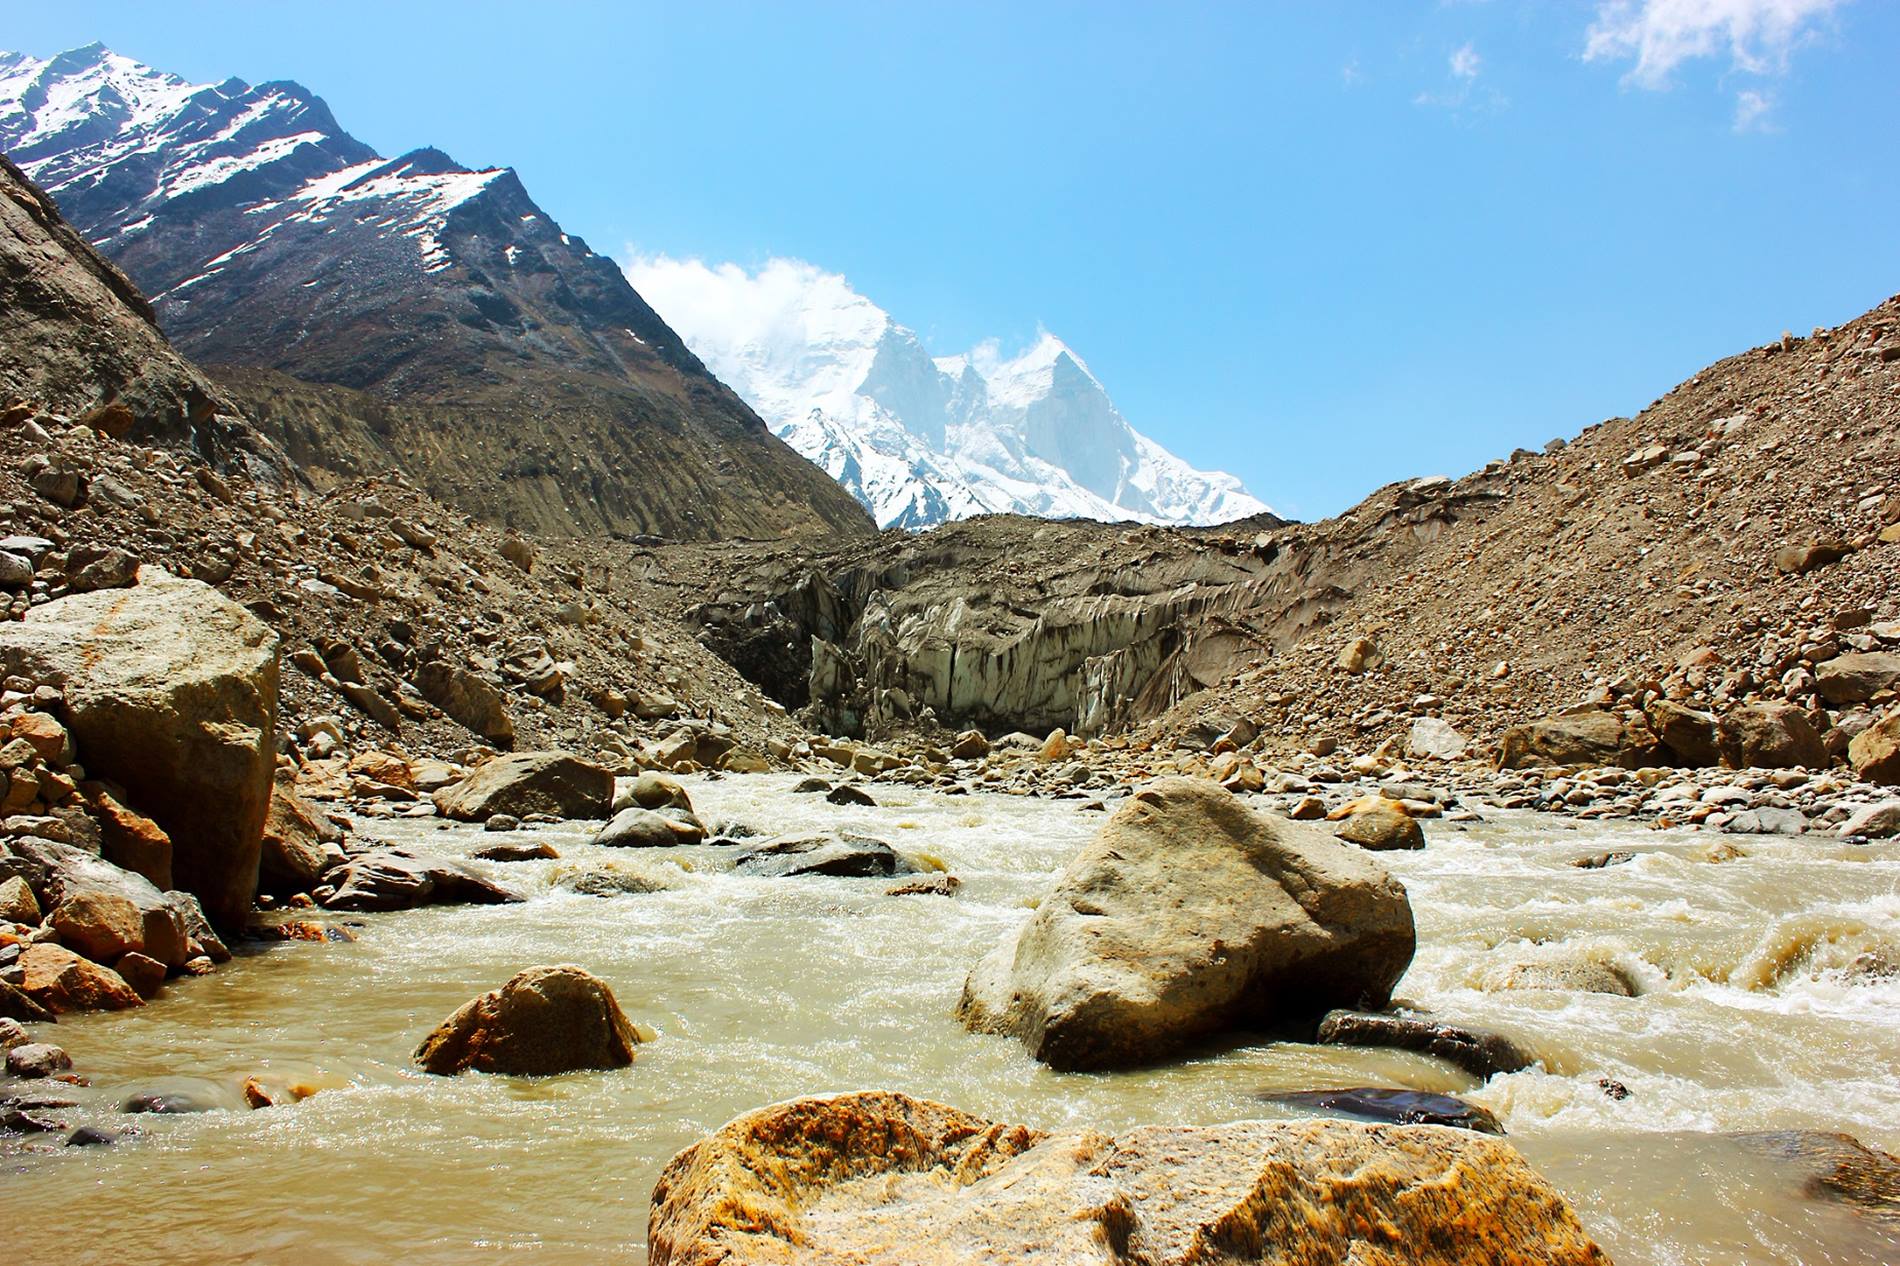 Gaumukh - Where the Gagotri Glacier begins to melt and the river Ganges begins to flow with the Bhagirathi peak in the background, the photo of Gaumukh, Gagotri Glacier, Uttarakhand, India was taken